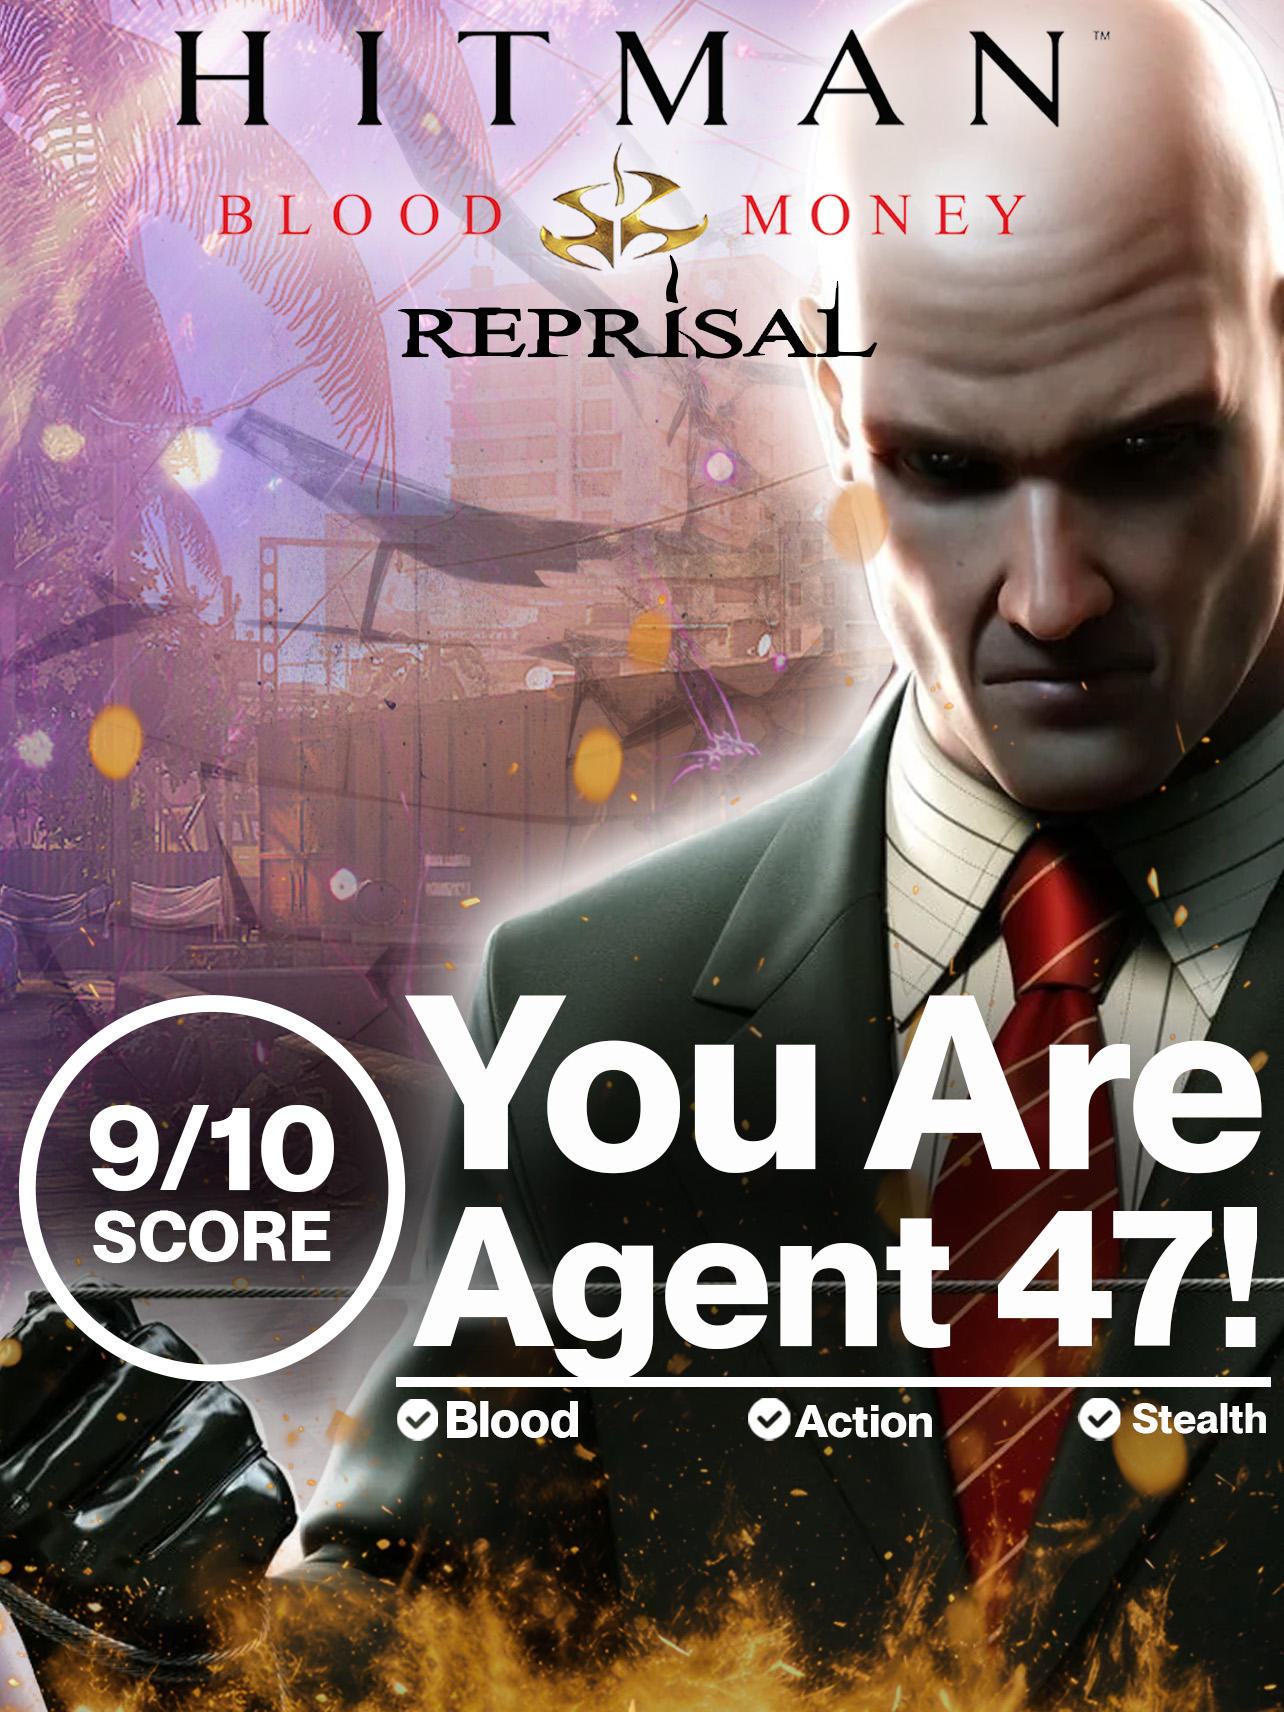 Hitman: Blood Money - Reprisal is an AWESOME Assassin Game on Mobile!